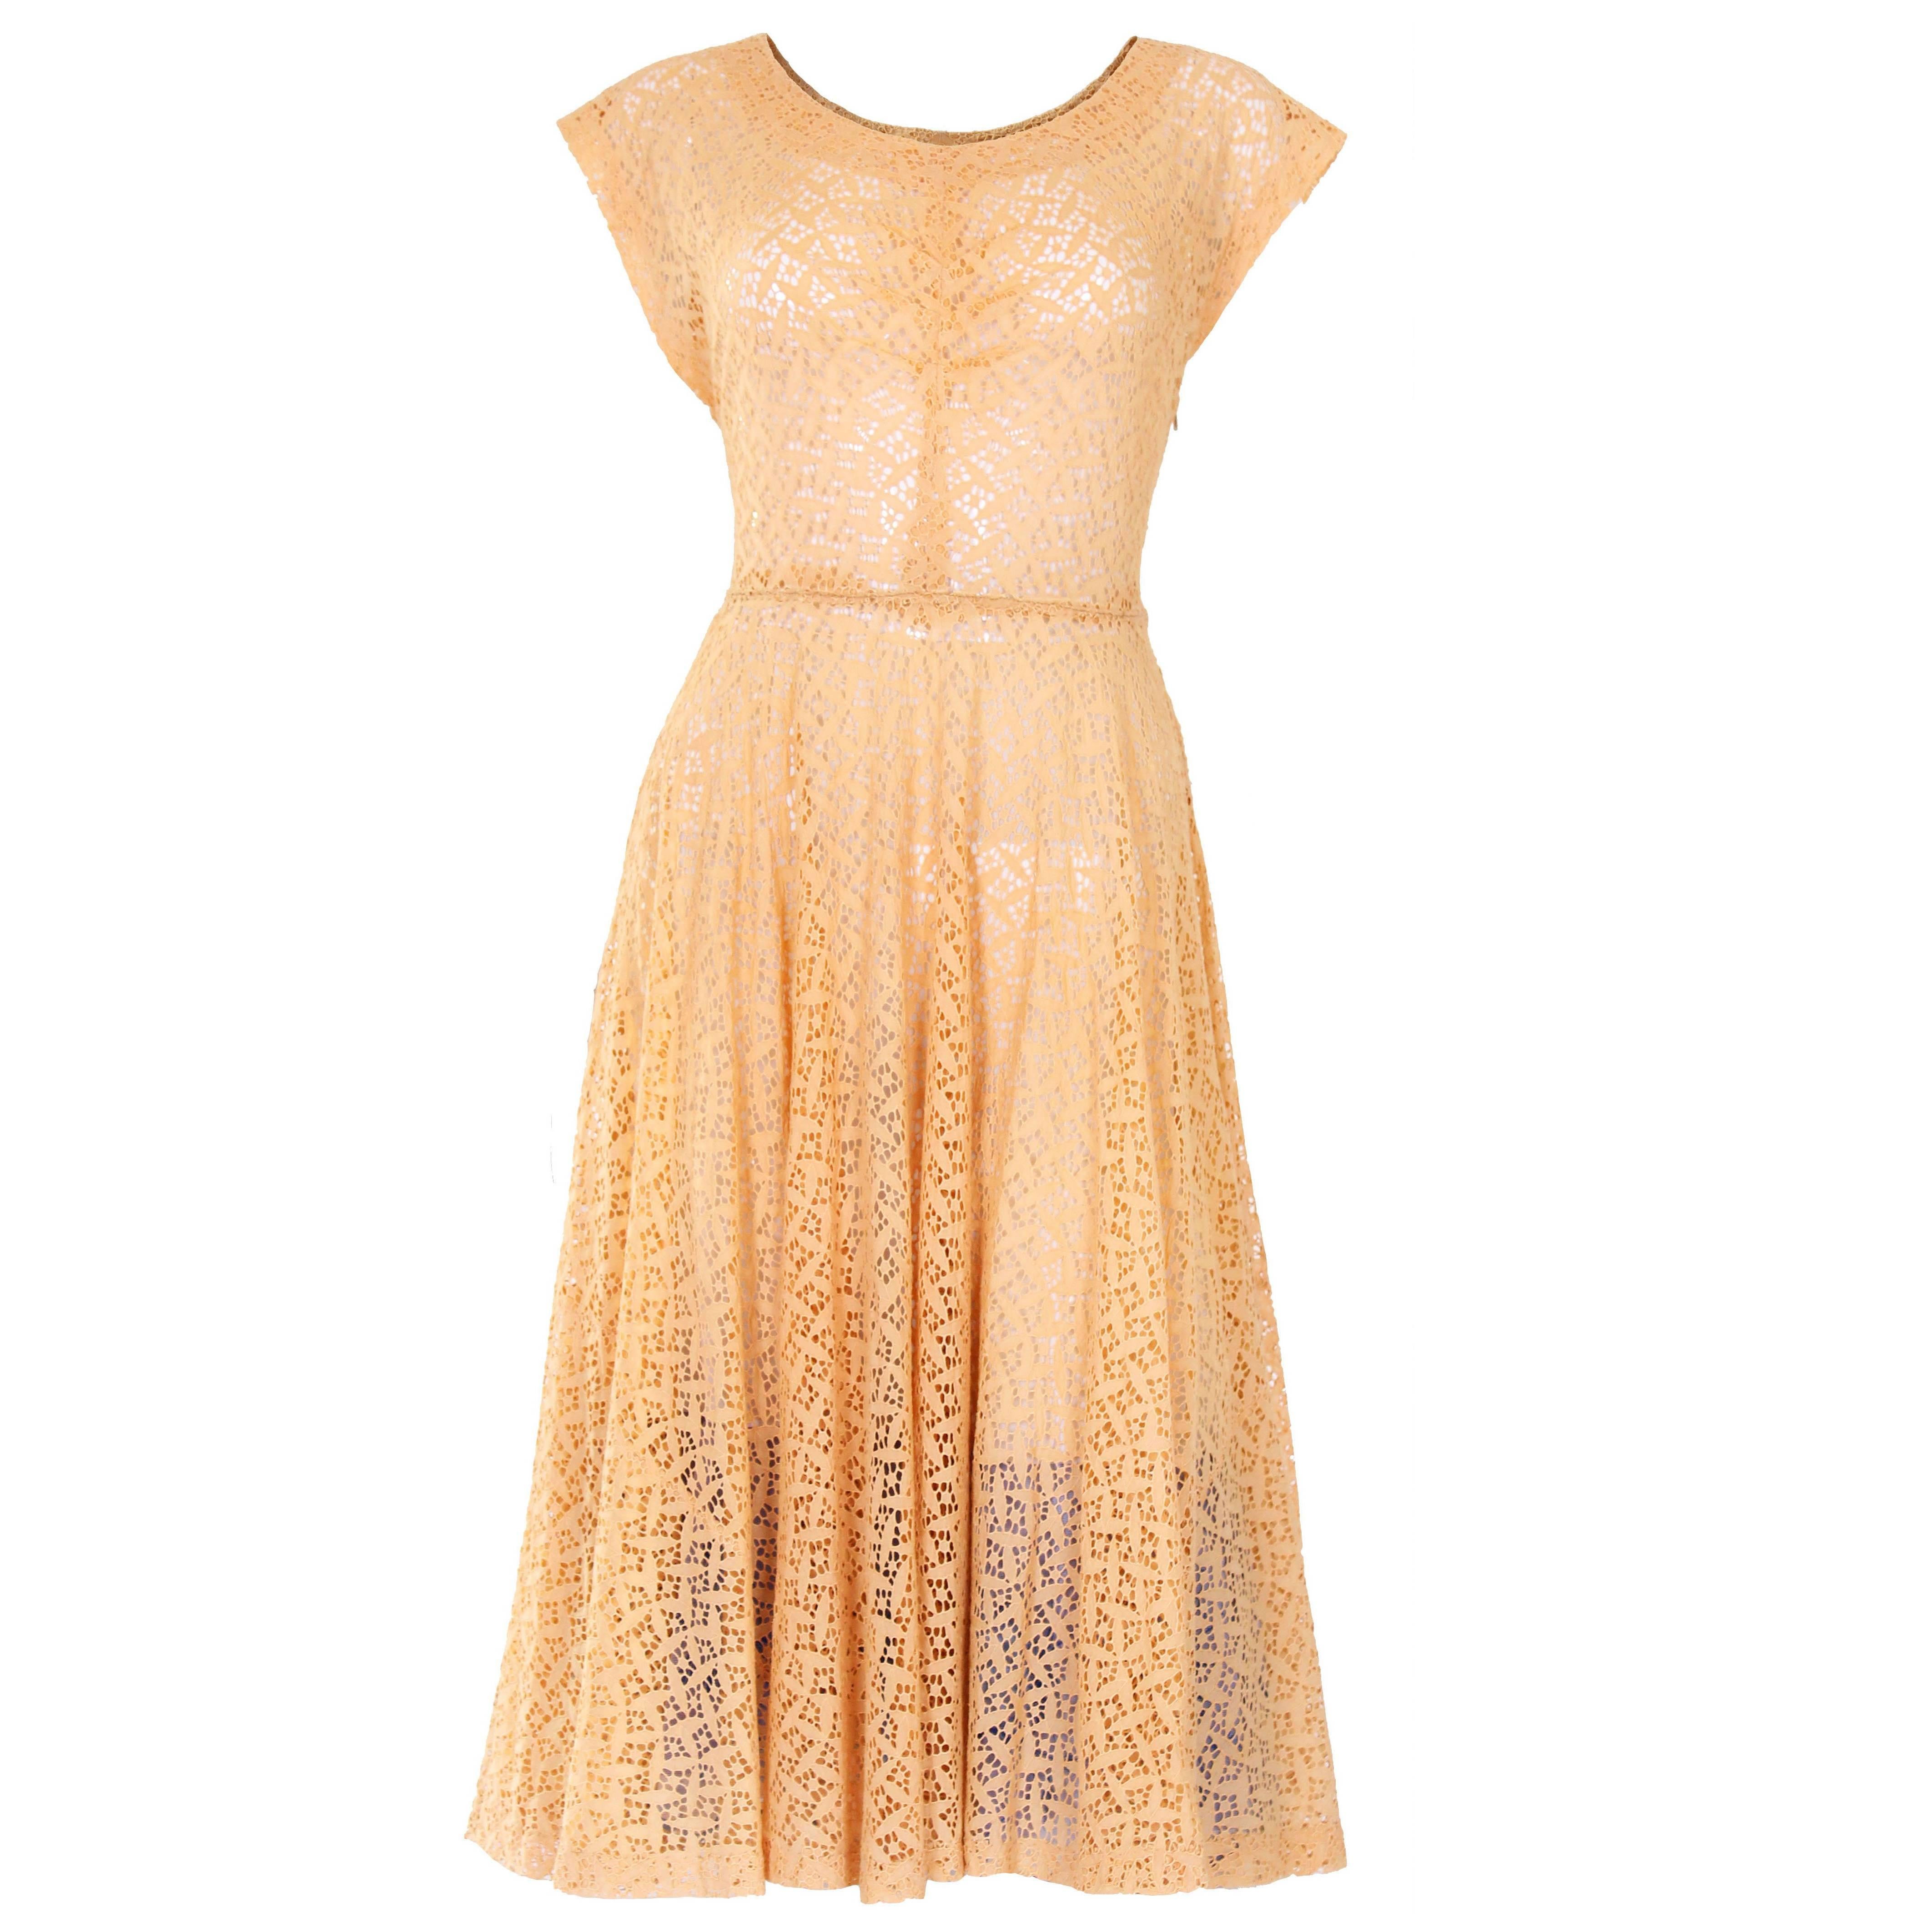 1950s Apricot Broderie Anglaise Dress